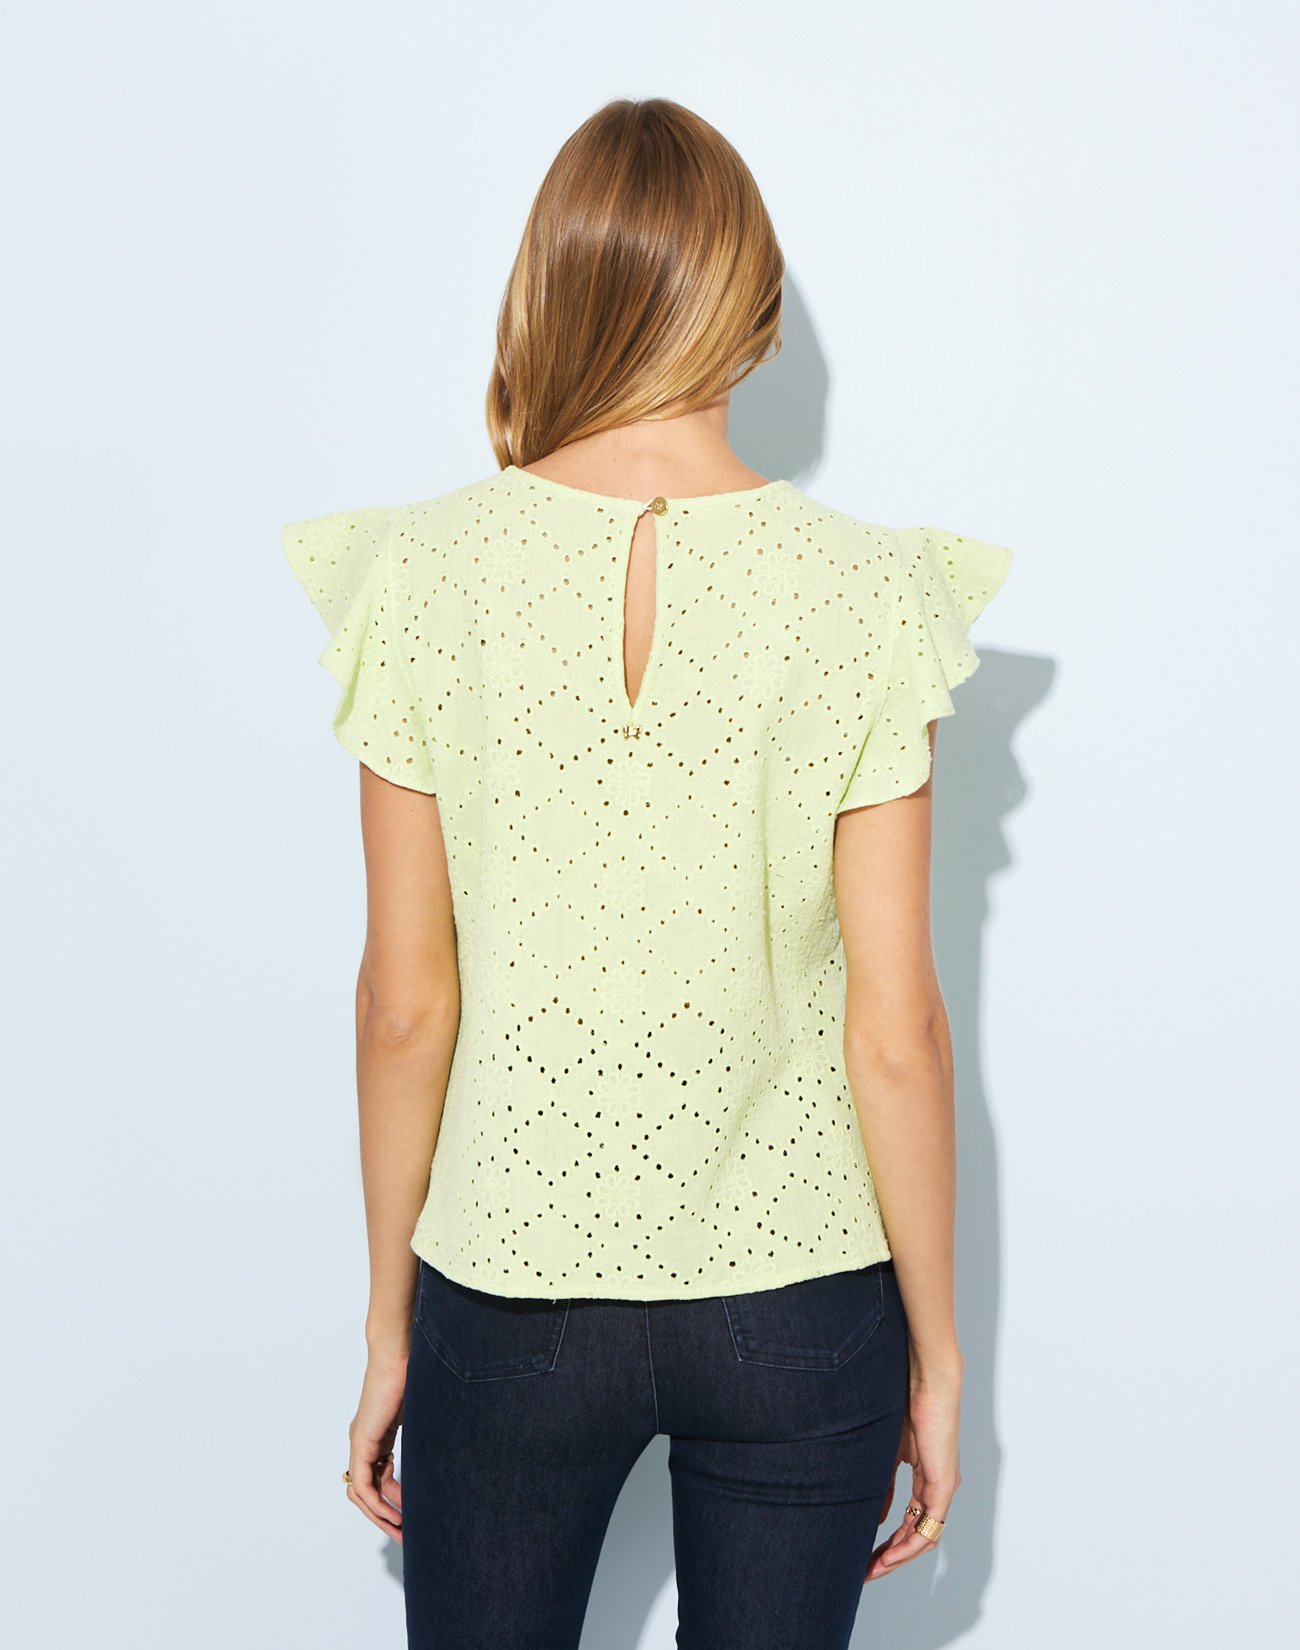 Broderie top